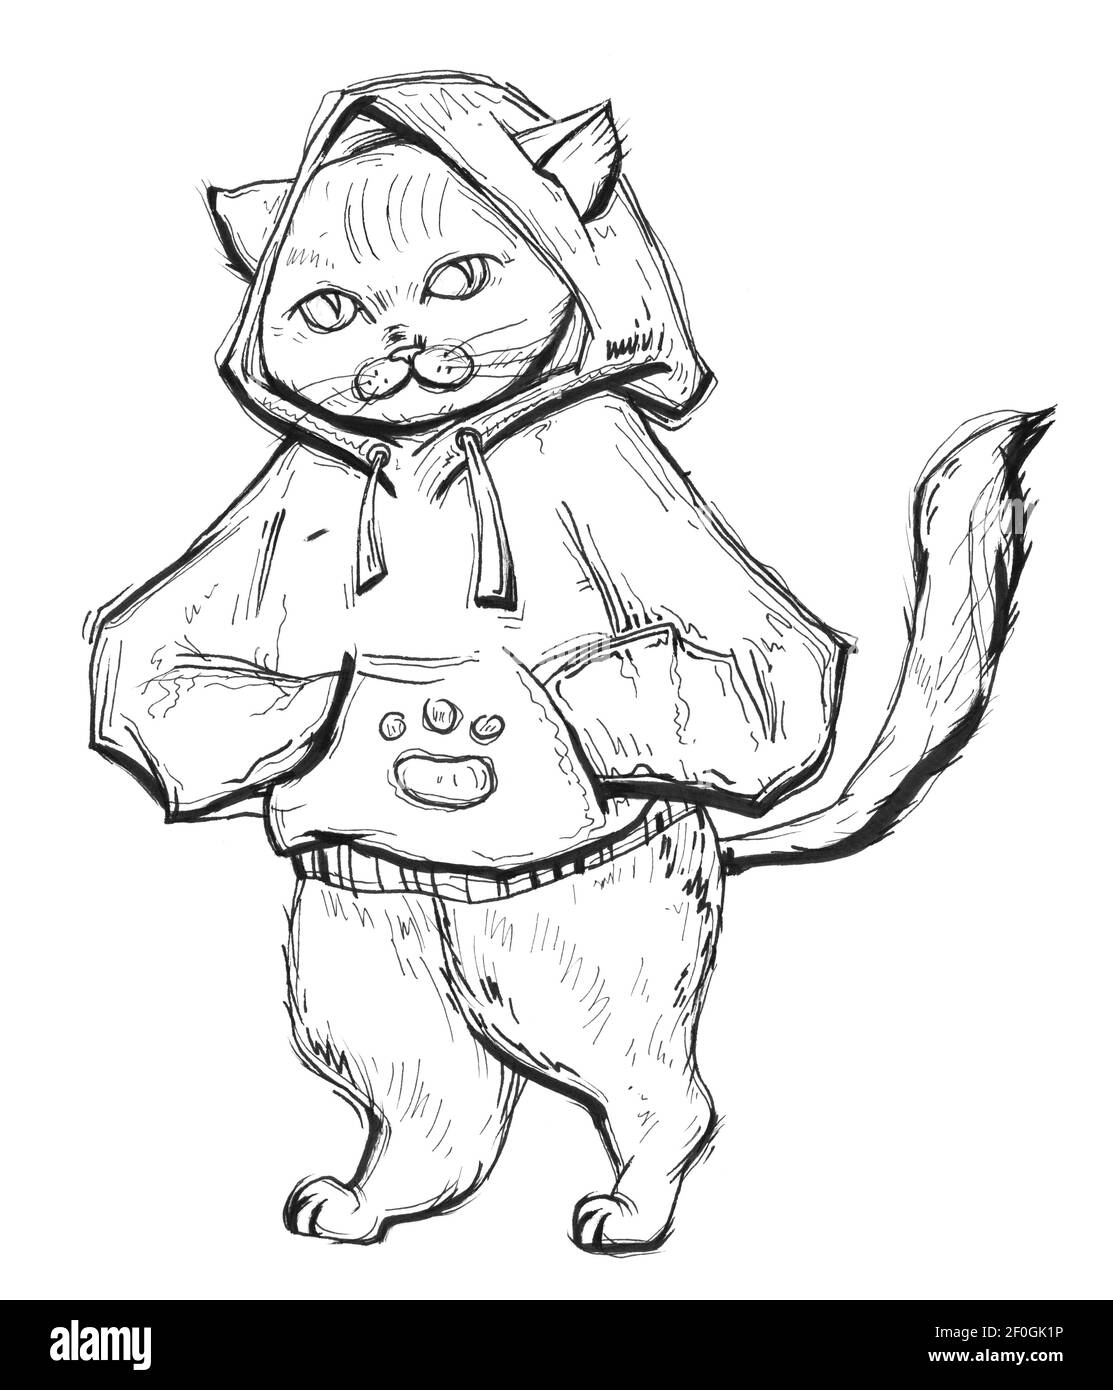 Cat dressed in the hoodie. Vintage monochrome hatching illustration isolated on white background. Hand drawn design element for t-shirt, poster and we Stock Photo